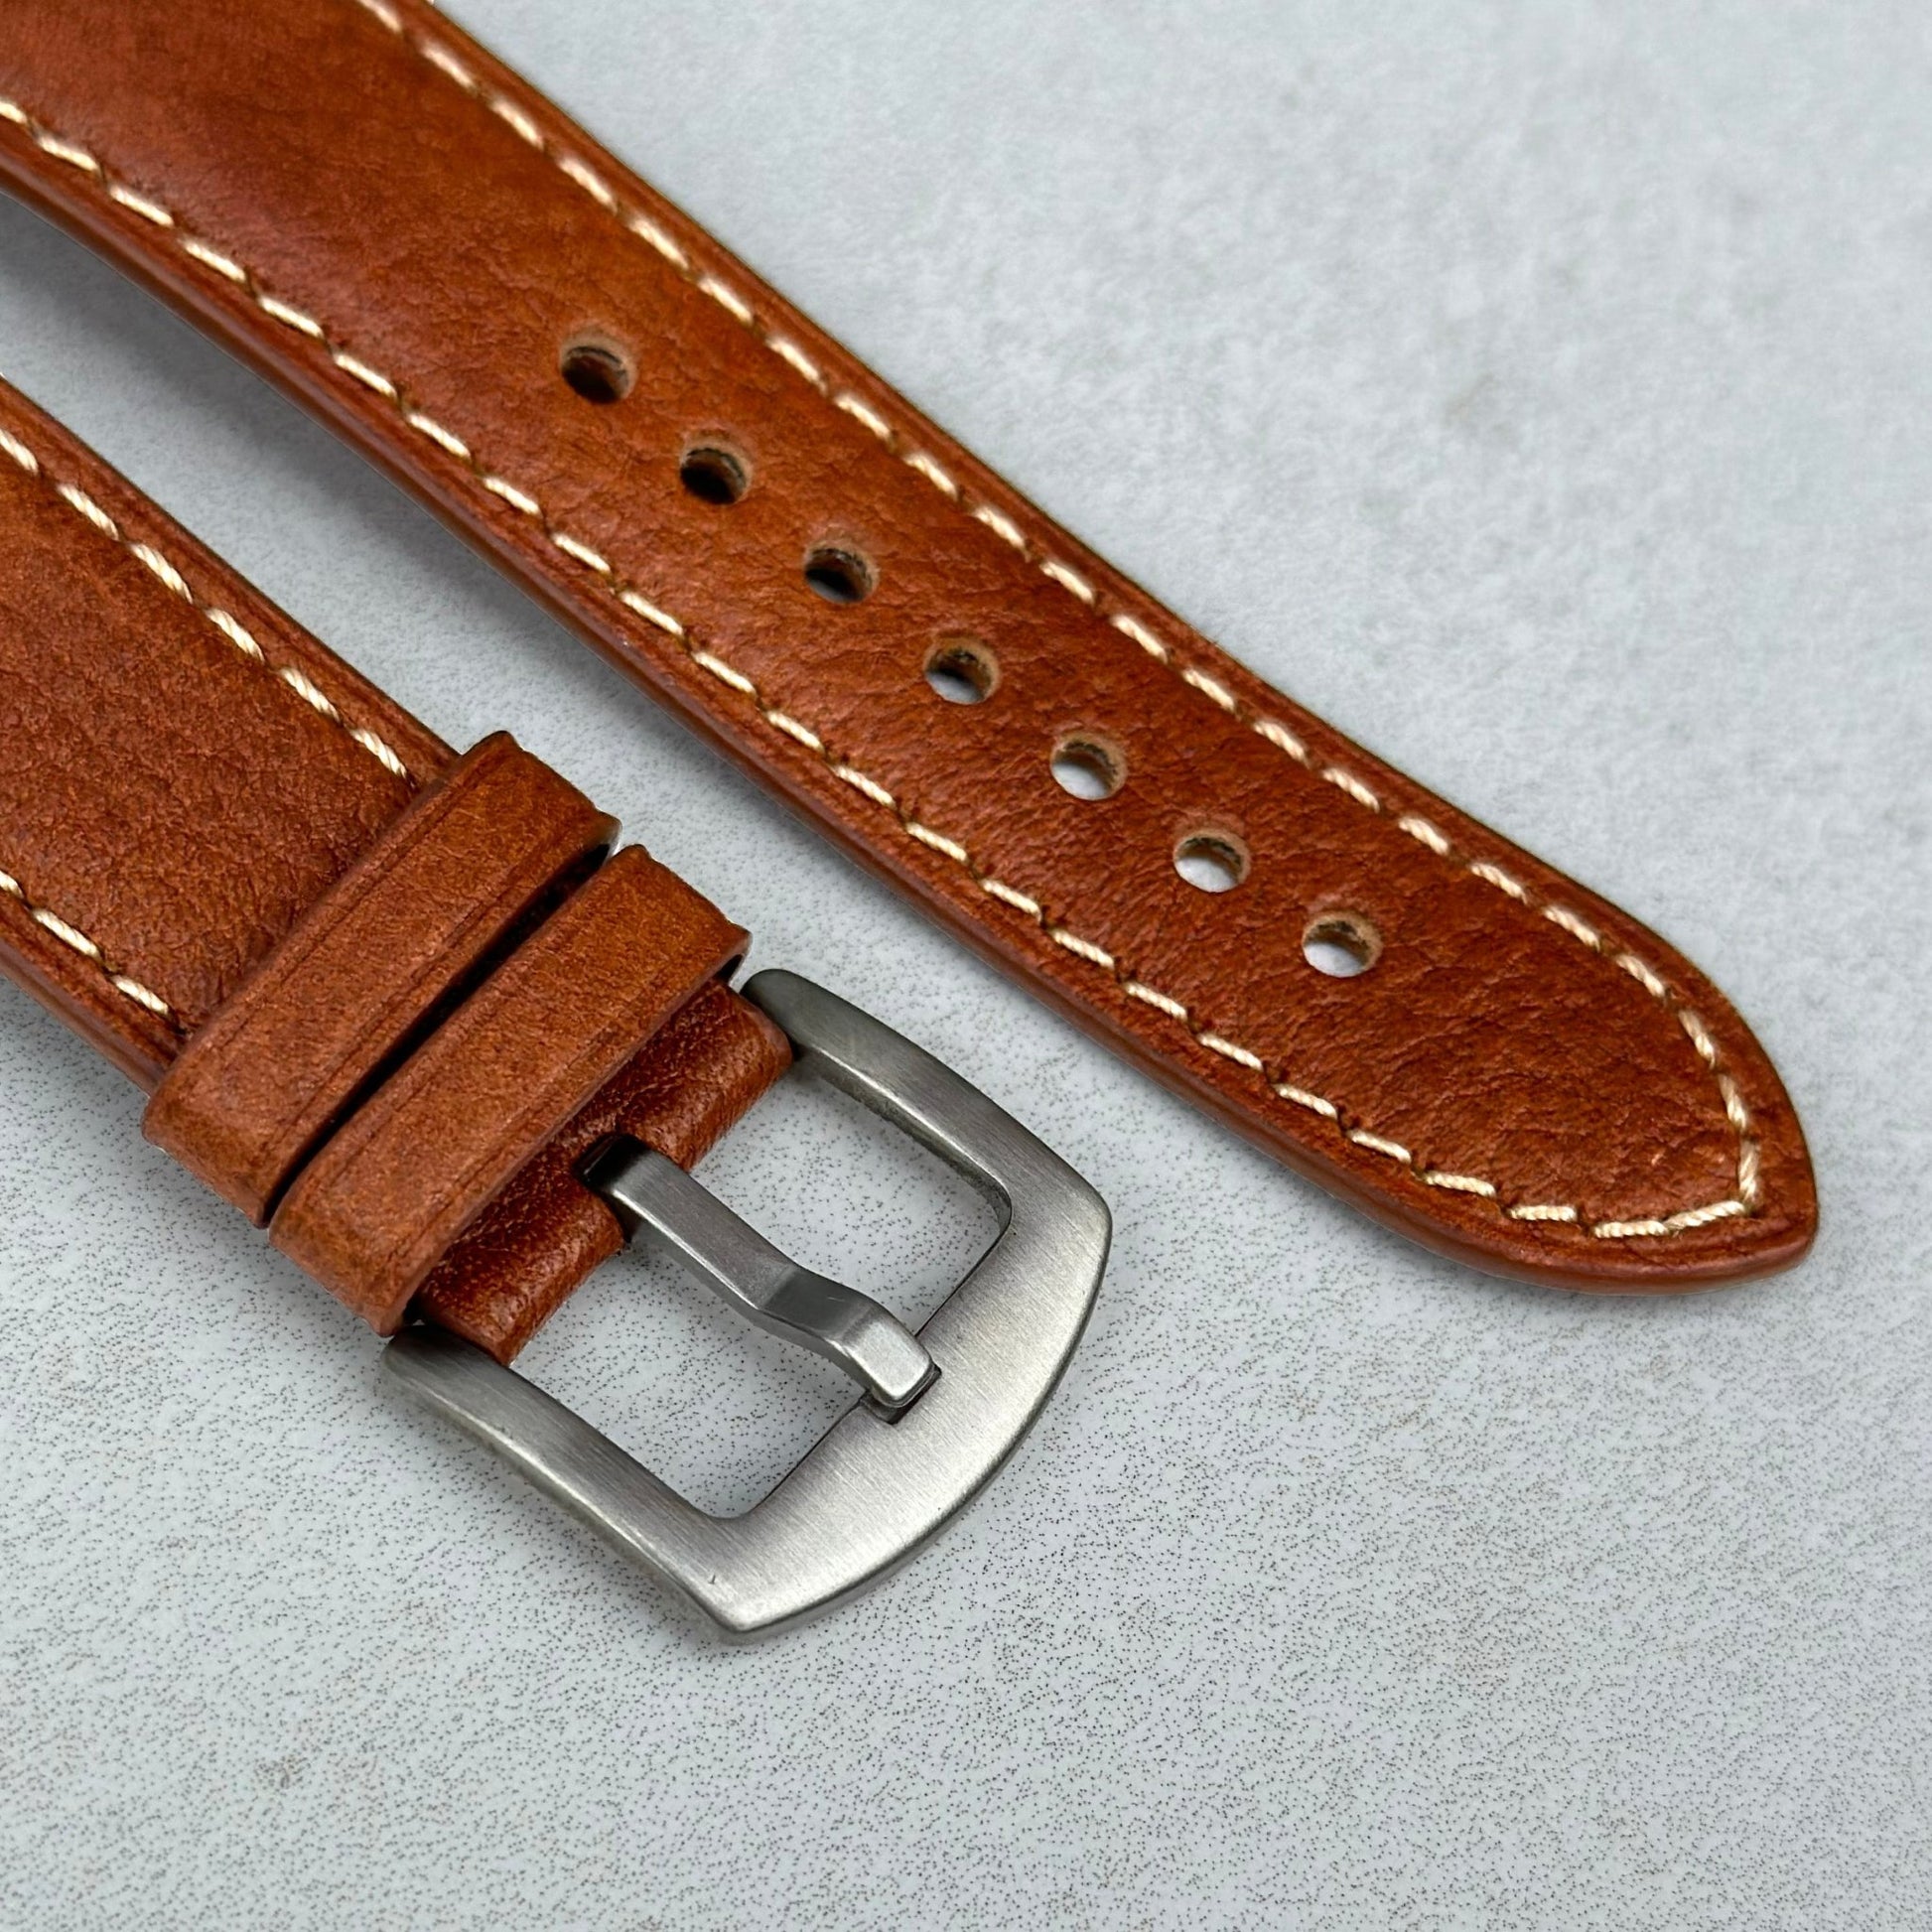 Brushed 316L stainless steel buckle on the Rome copper tan leather watch strap. Watch and Strap.